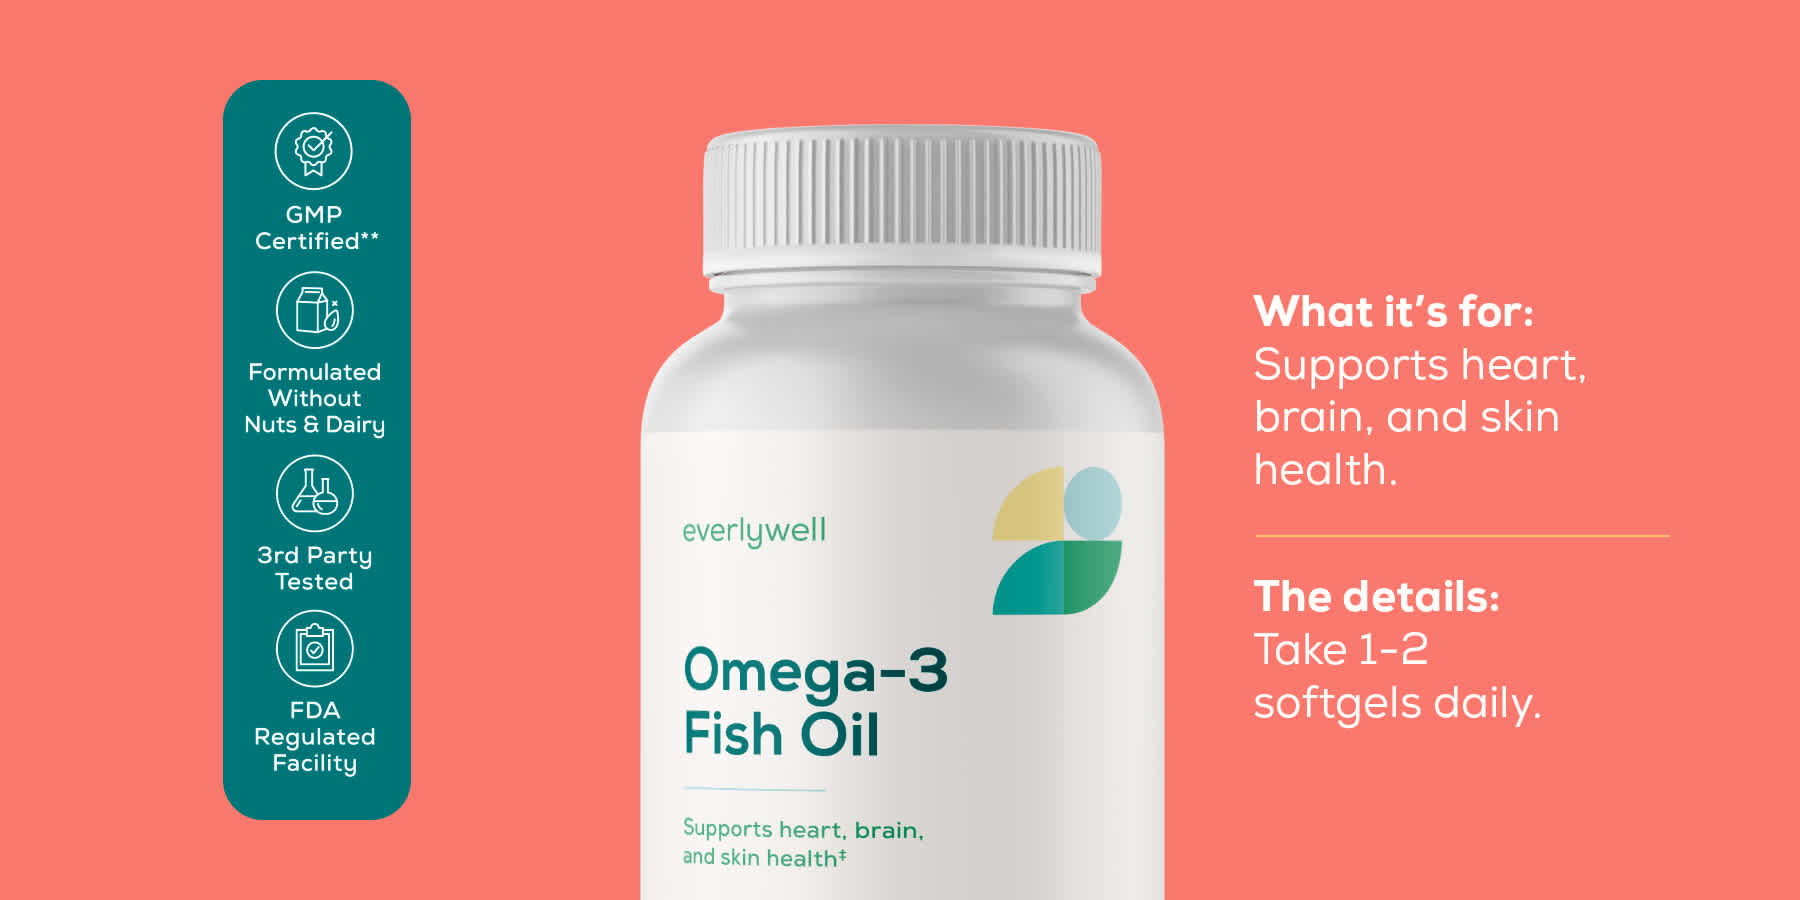 Everlywell Omega-3 Fish Oil supplements with DHA for pregnancy